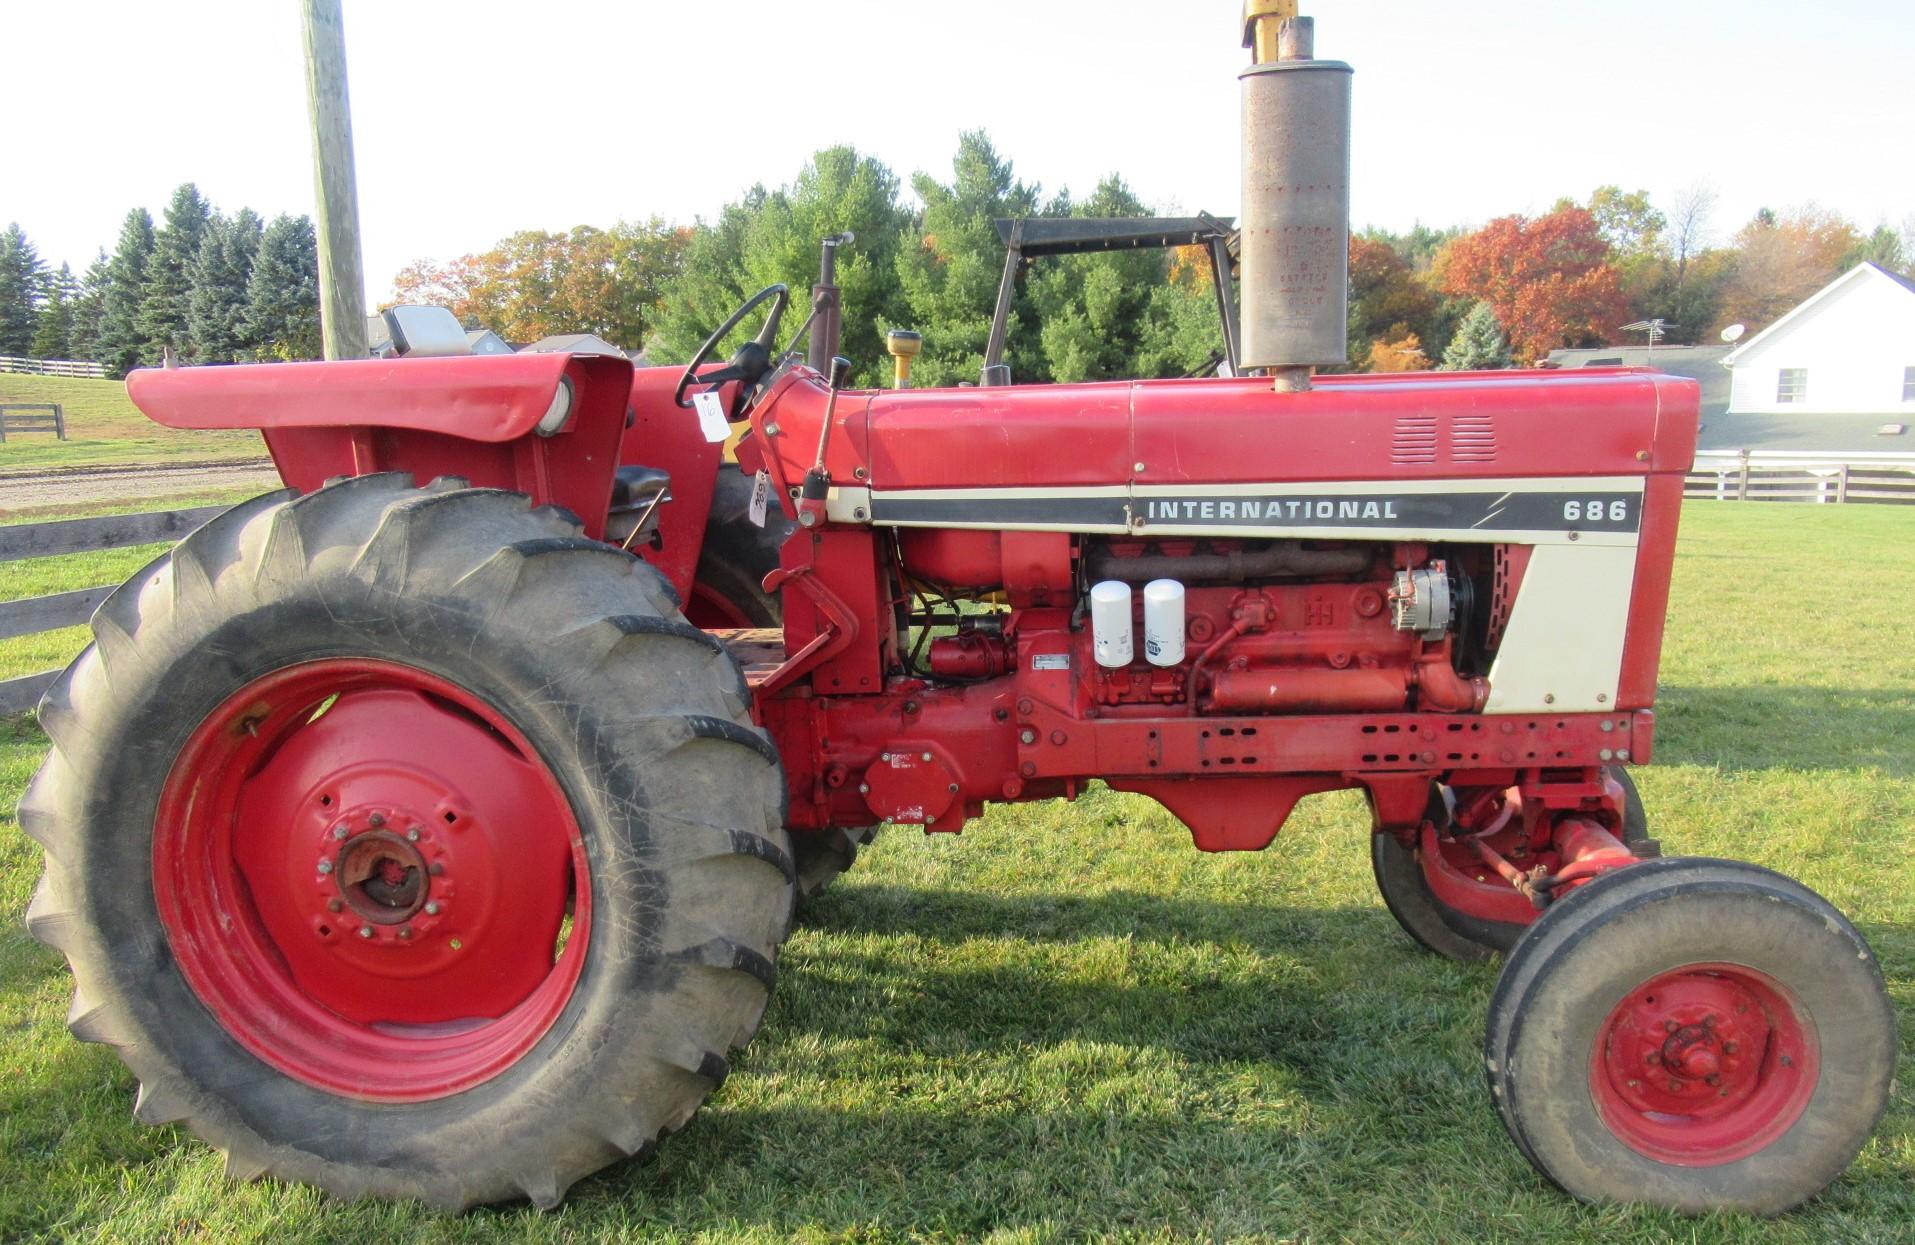 1977 International 686 Wide Front Tractor.